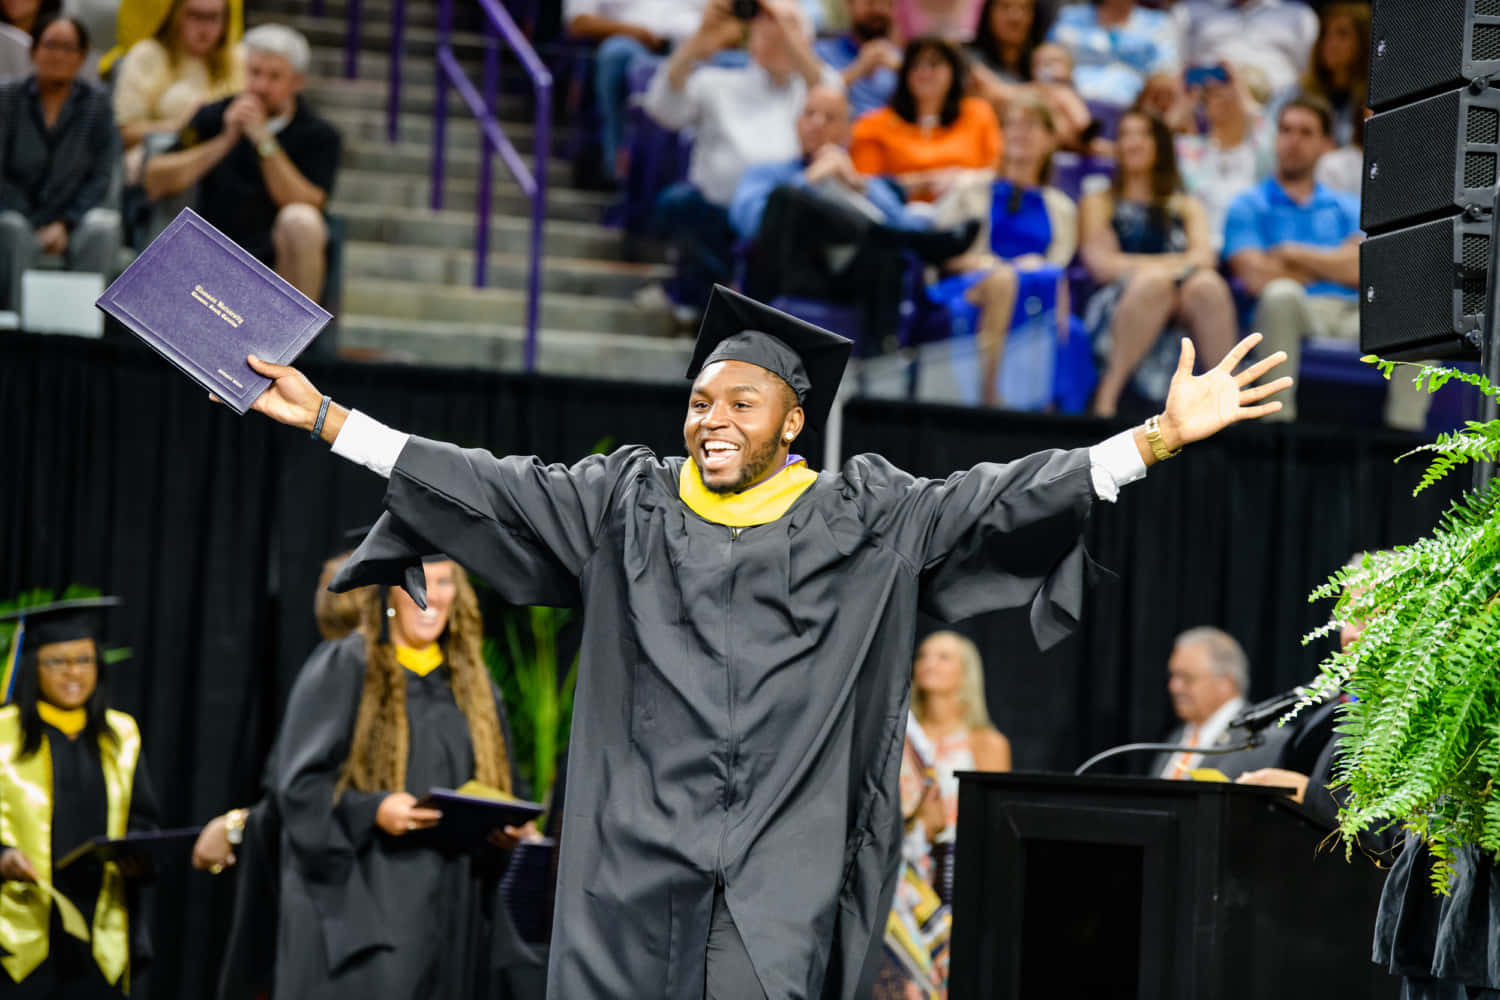 A Graduate In A Graduation Gown With His Arms Raised